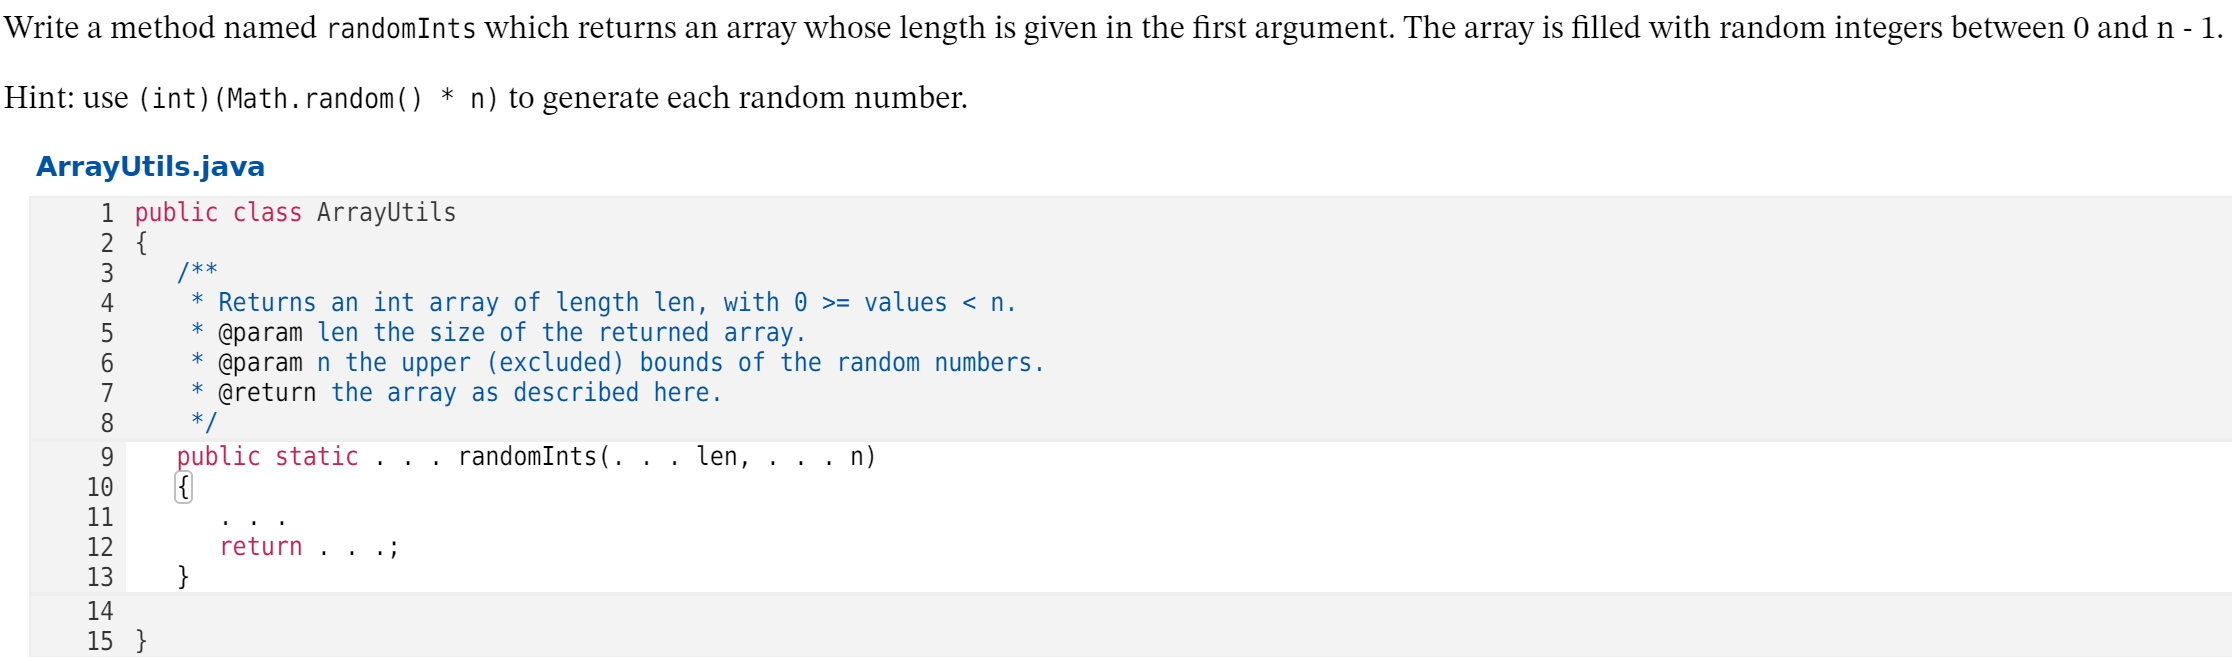 Write a method named randomInts which returns an array whose length is given in the first argument. The array is filled with random integers between 0 and n - 1.
Hint: use (int) (Math.random() * n) to generate each random number.
ArrayUtils.java
1 public class ArrayUtils
2 {
3
/**
* Returns an int array of length len, with 0 >= values < n.
* @param len the size of the returned array.
* @param n the upper (excluded) bounds of the random numbers.
* @return the array as described here.
*/
4
7
8.
public static
randomInts(. . . len,
n)
.. .
10
11
12
13
return
}
14
15 }
